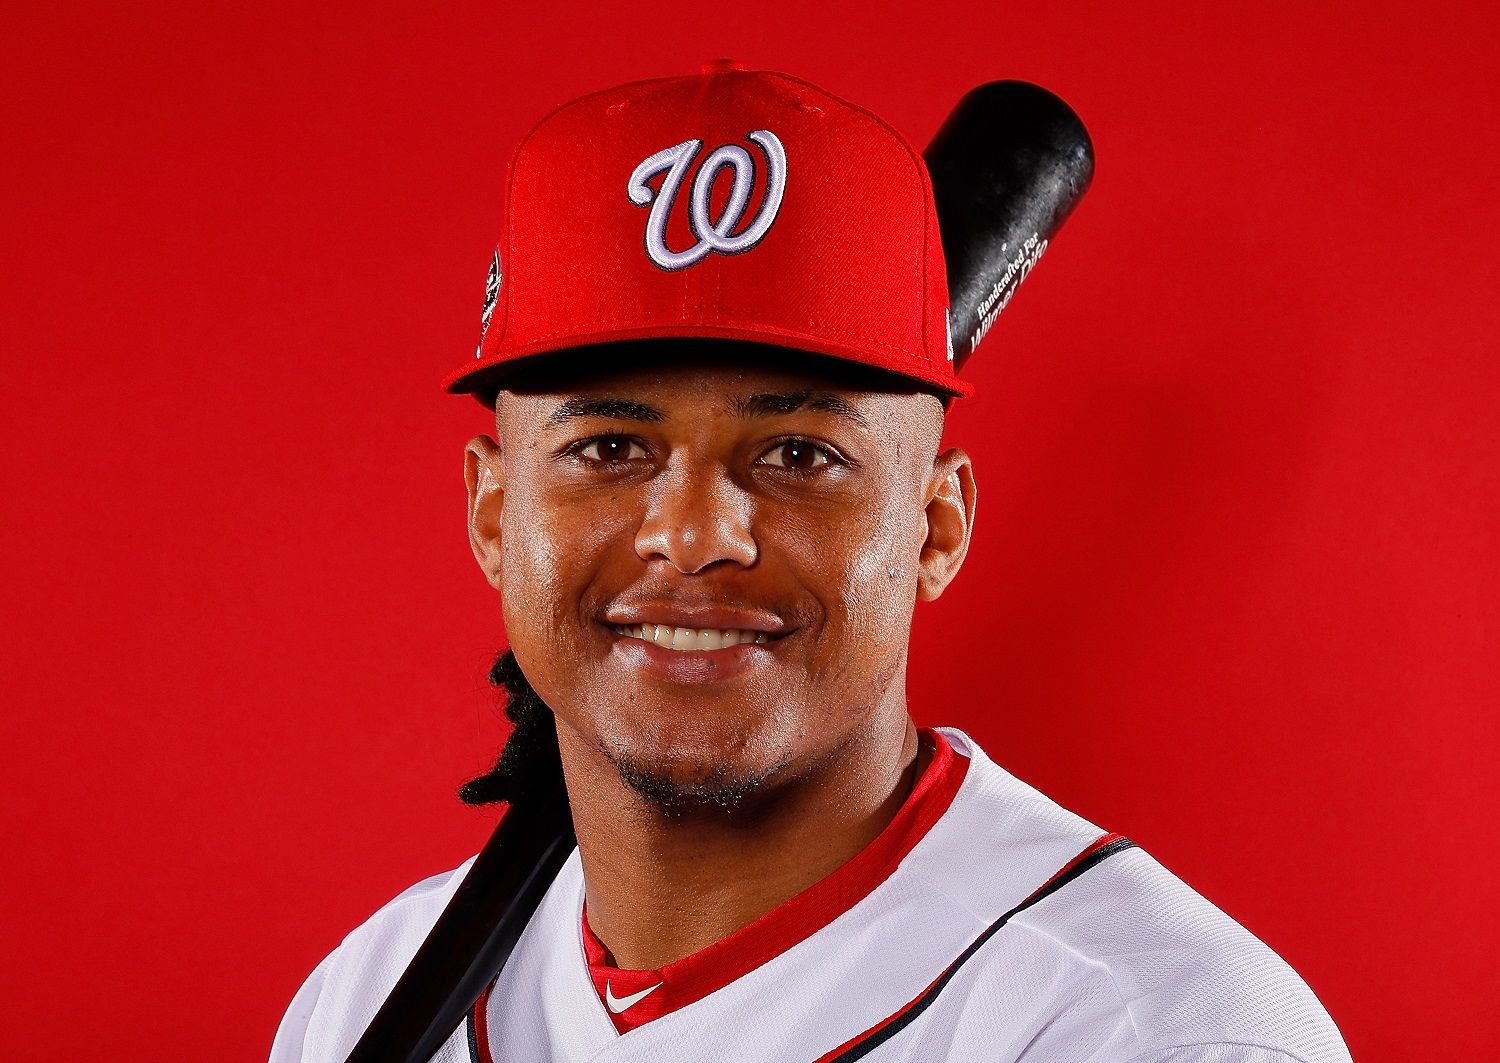 WEST PALM BEACH, FL - FEBRUARY 22:  Wilmer Difo #1 of the Washington Nationals poses for a photo during photo days at The Ballpark of the Palm Beaches on February 22, 2018 in West Palm Beach, Florida.  (Photo by Kevin C. Cox/Getty Images)